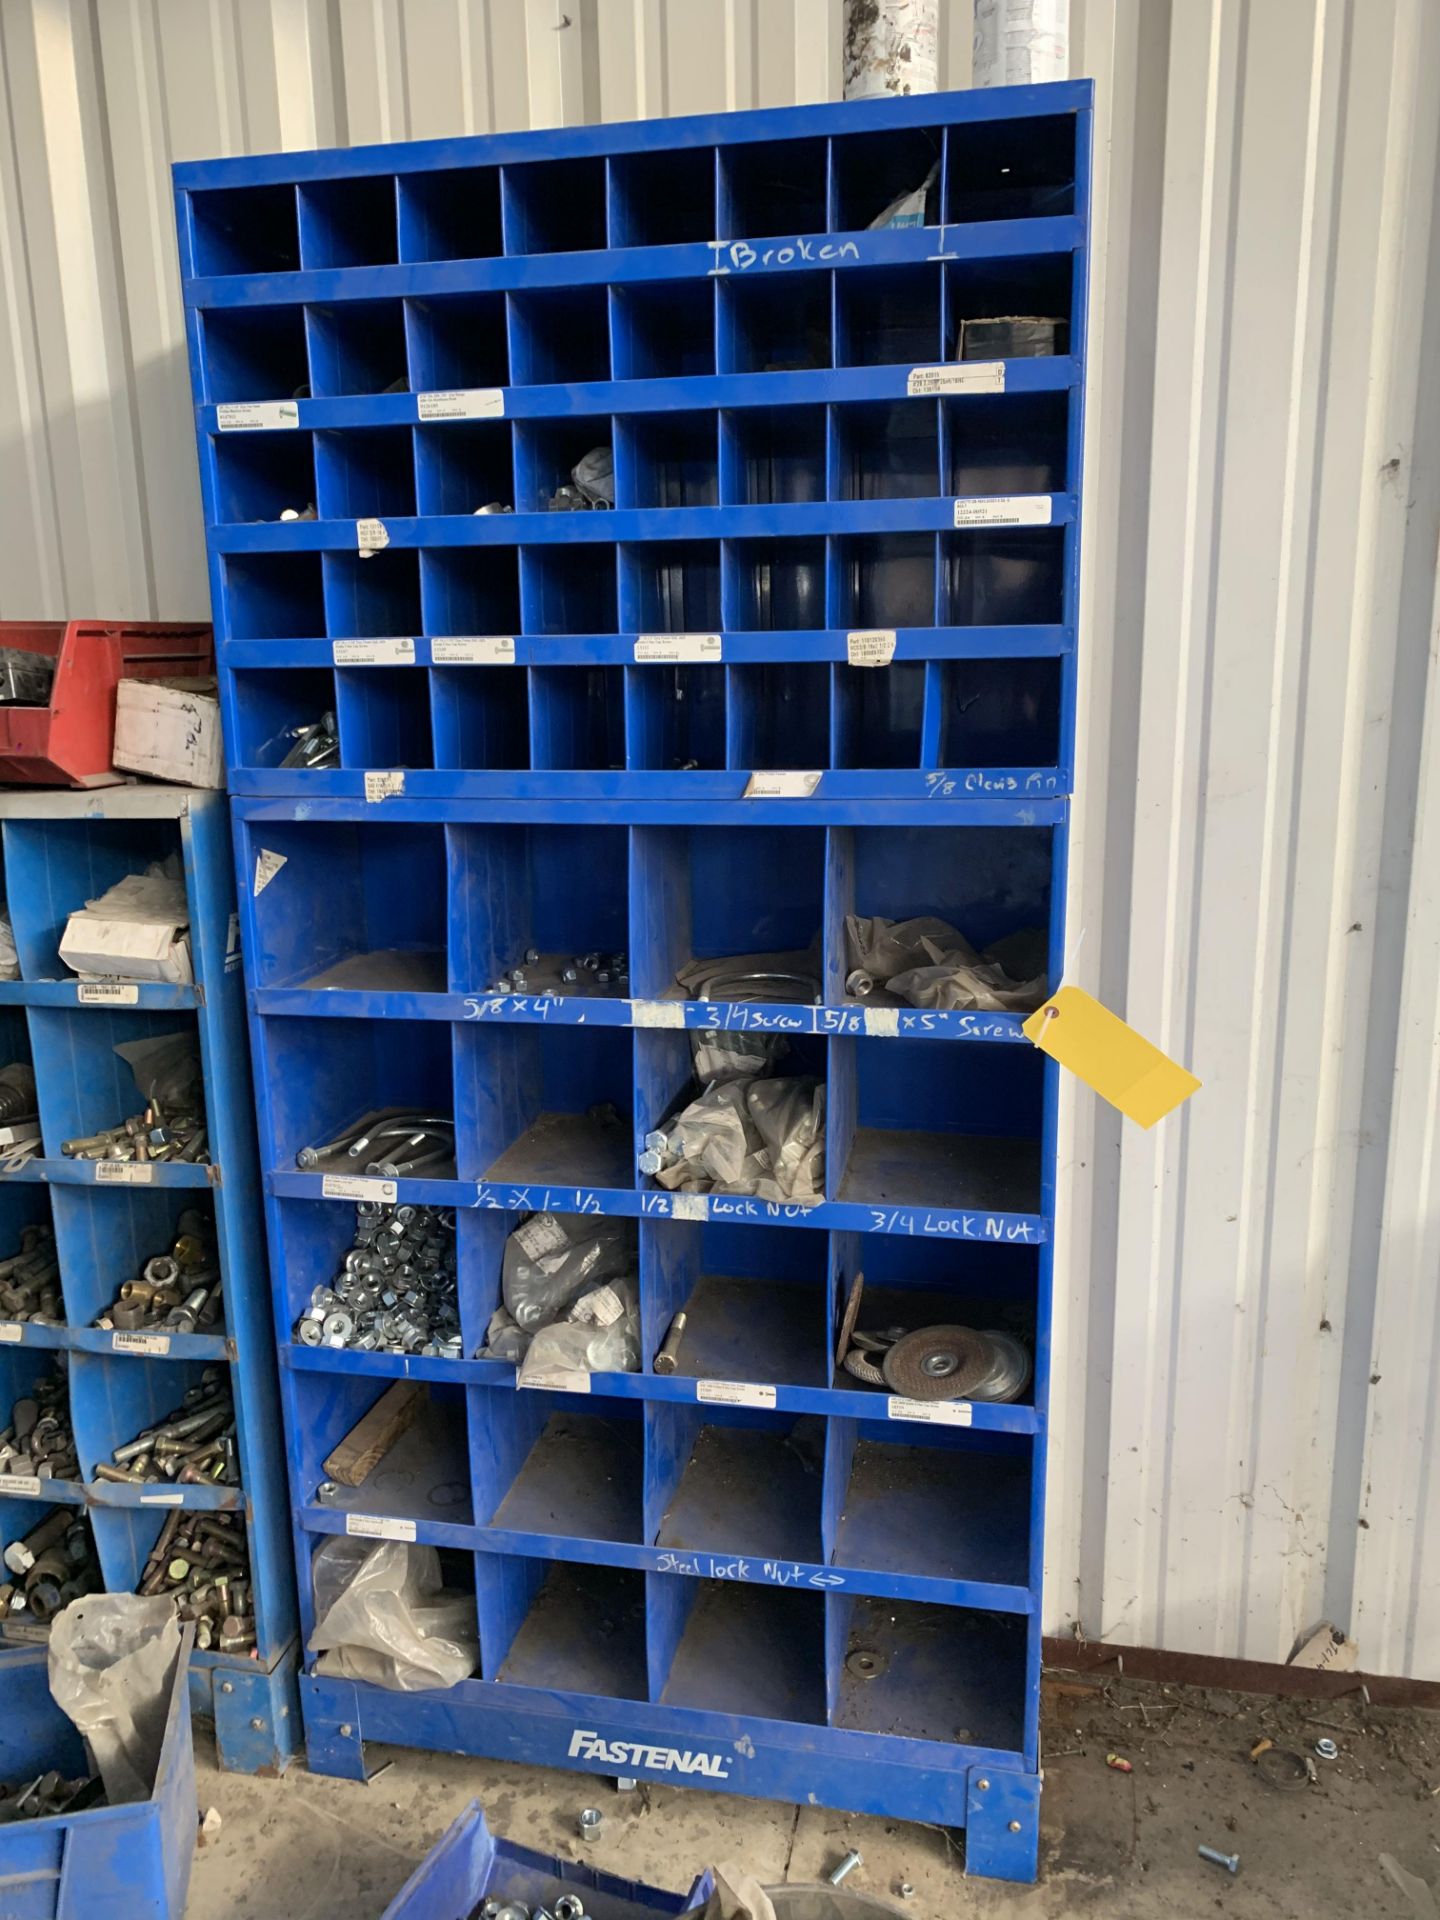 Fastenal Parts Shelves w Contents: Nuts, Bolts, Screws (MUST BE REMOVED BY NOVEMBER 16, 2022) - Image 6 of 8